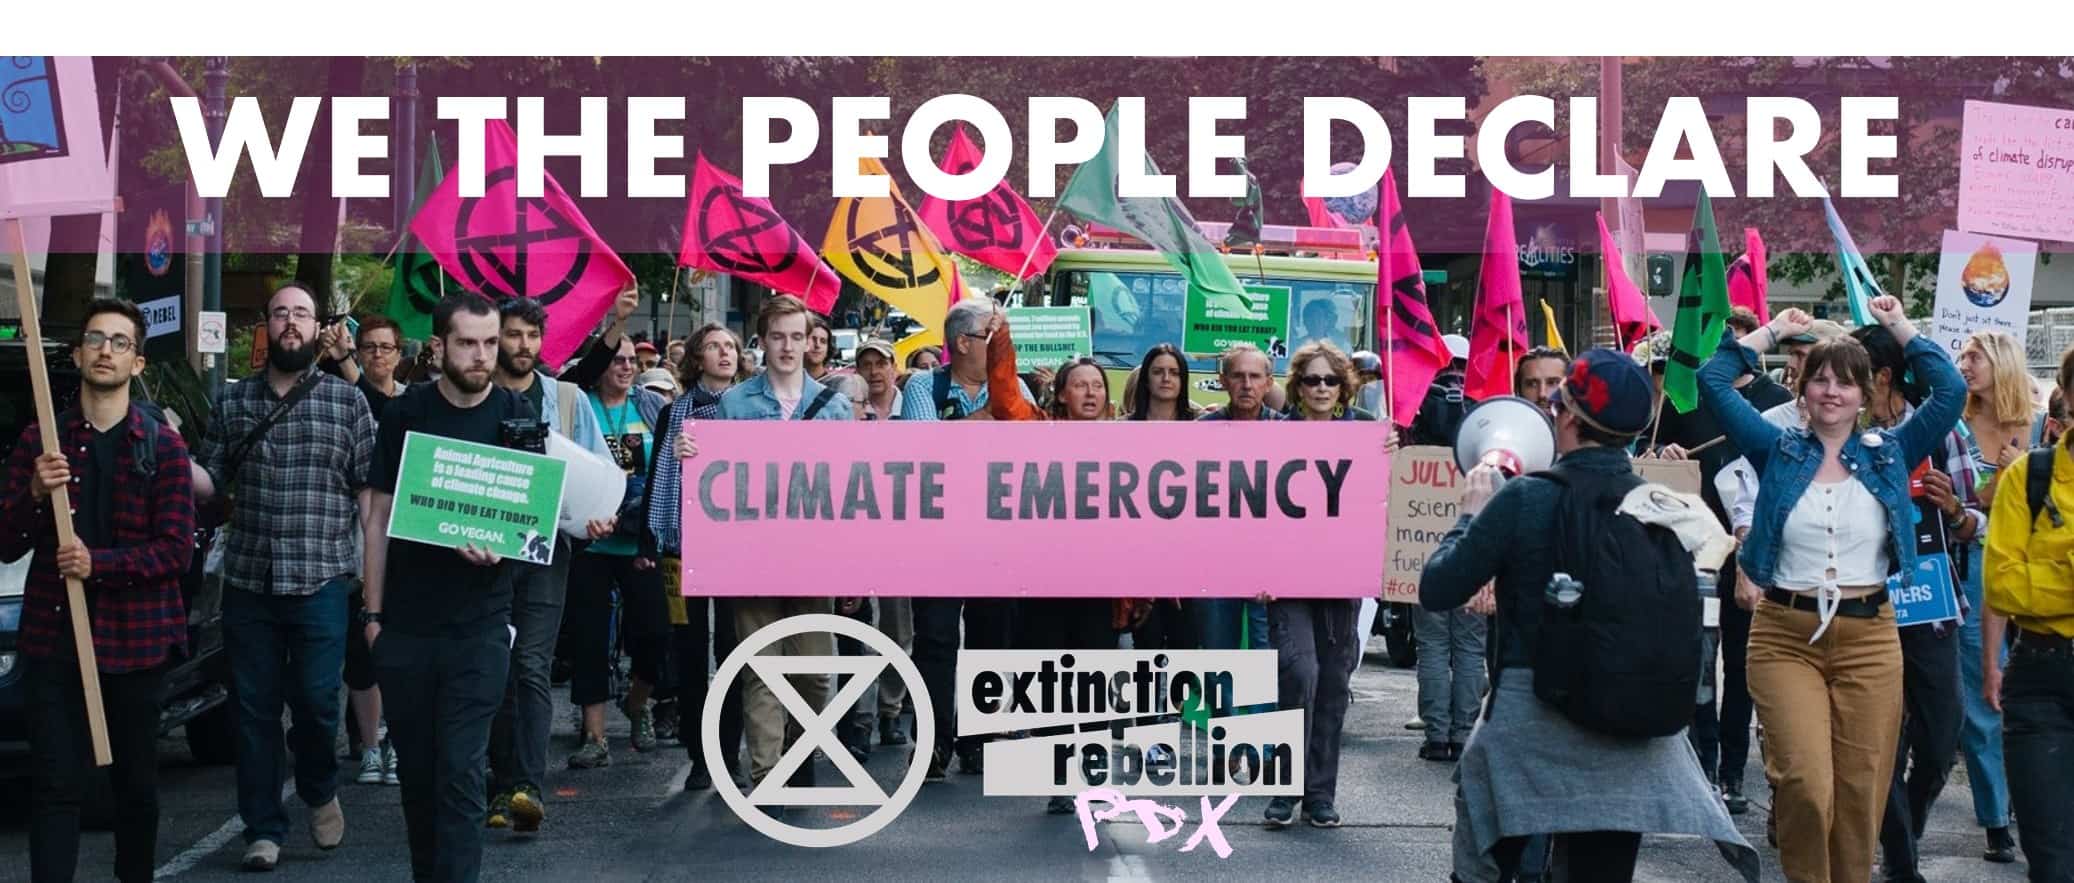 XRPDX -- We the people declare a climate emergency. Protesters on Solstice, 2019